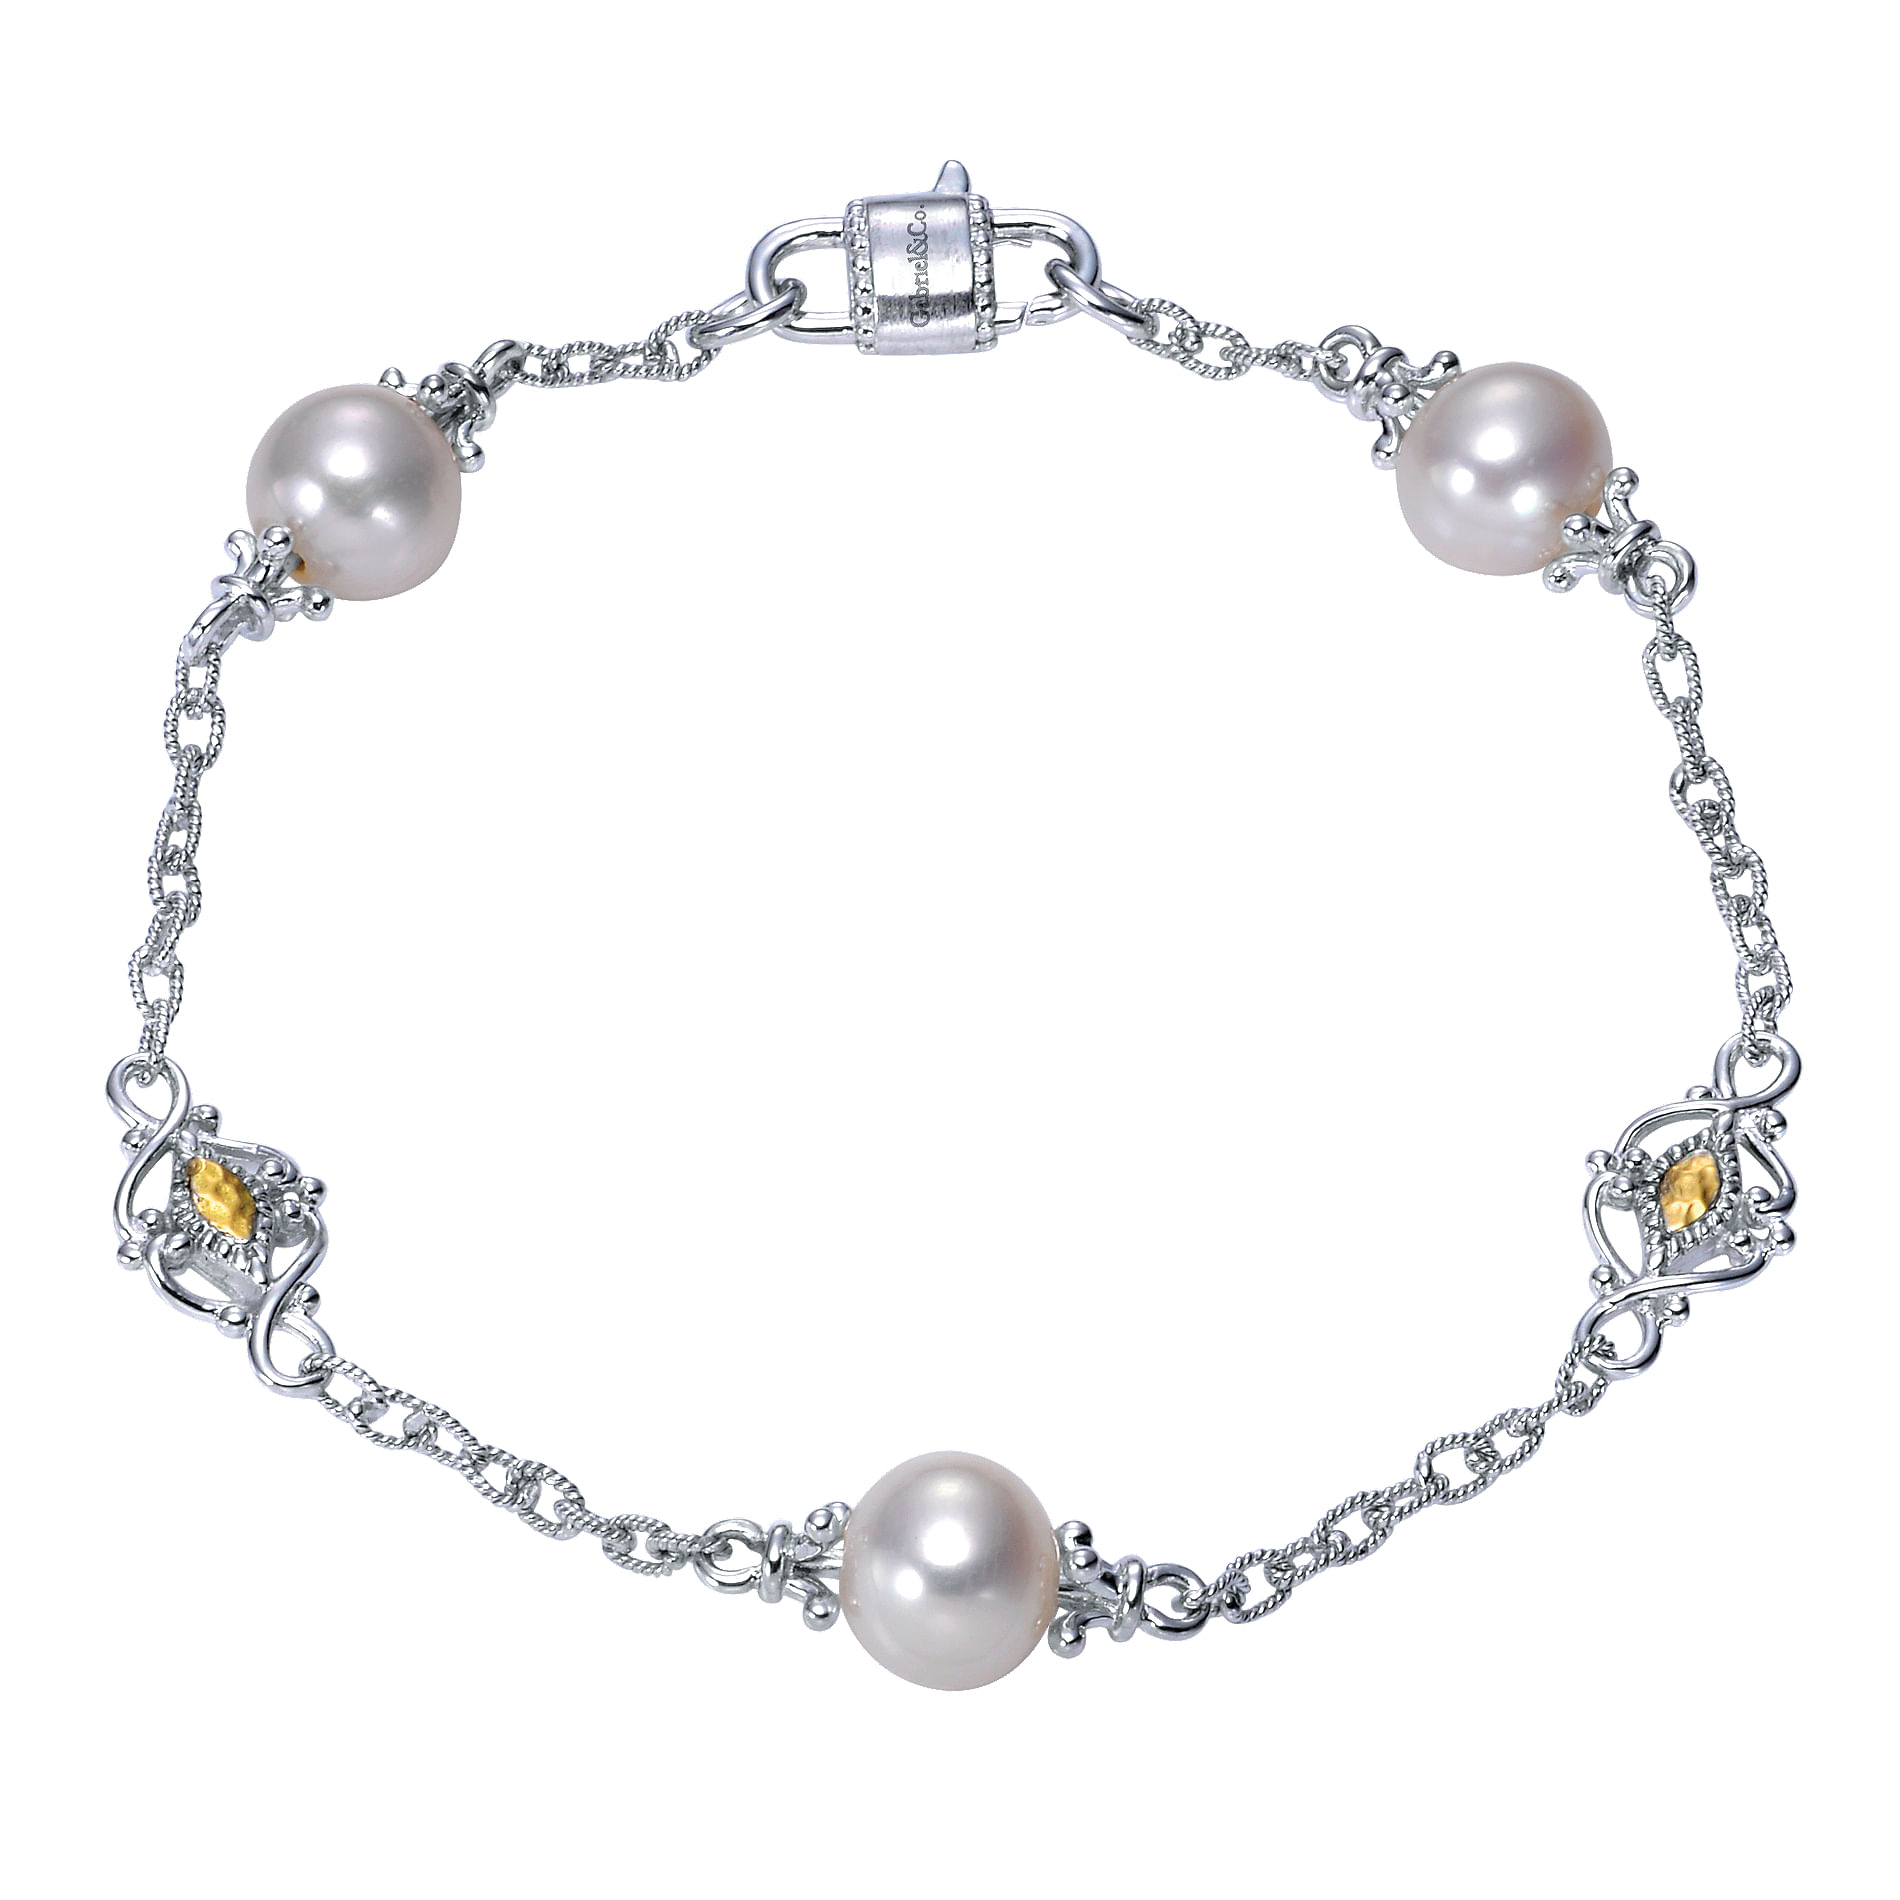 925 Sterling Silver-18K Yellow Gold Chain Bracelet with Pearls and Filigree Stations